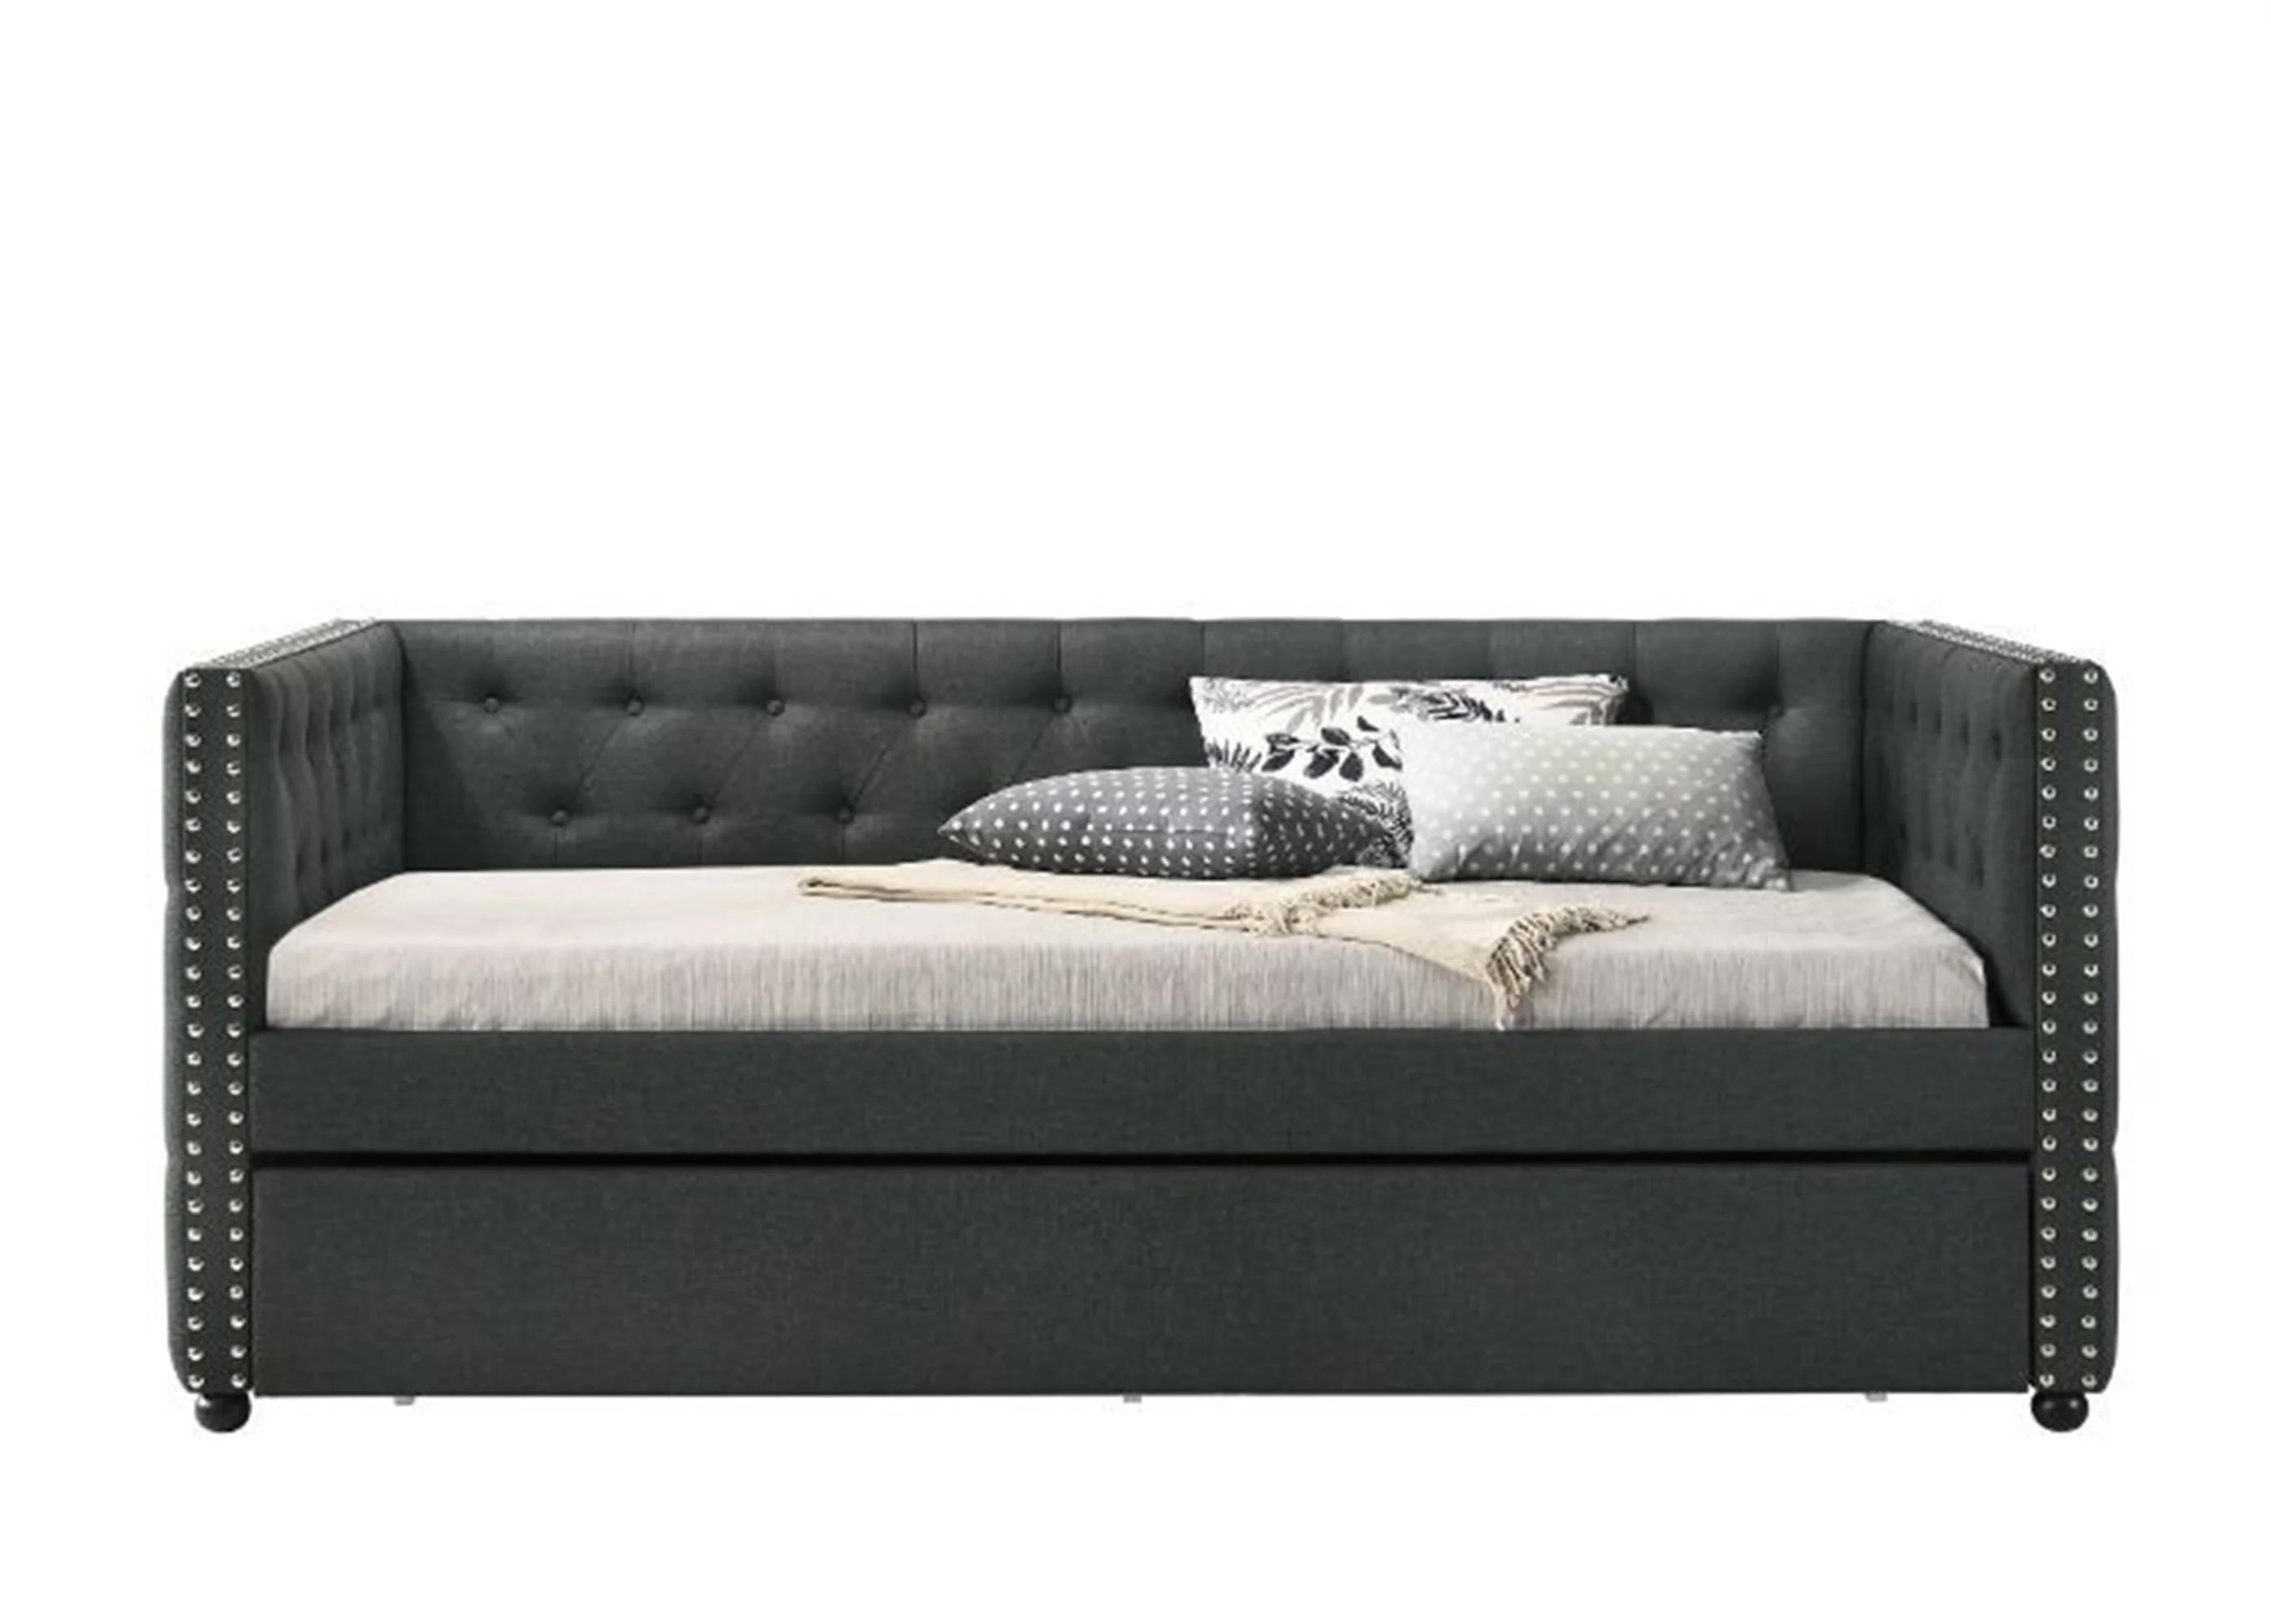 Transitional Daybed w/ trundle Romona 39455 in Gray Fabric